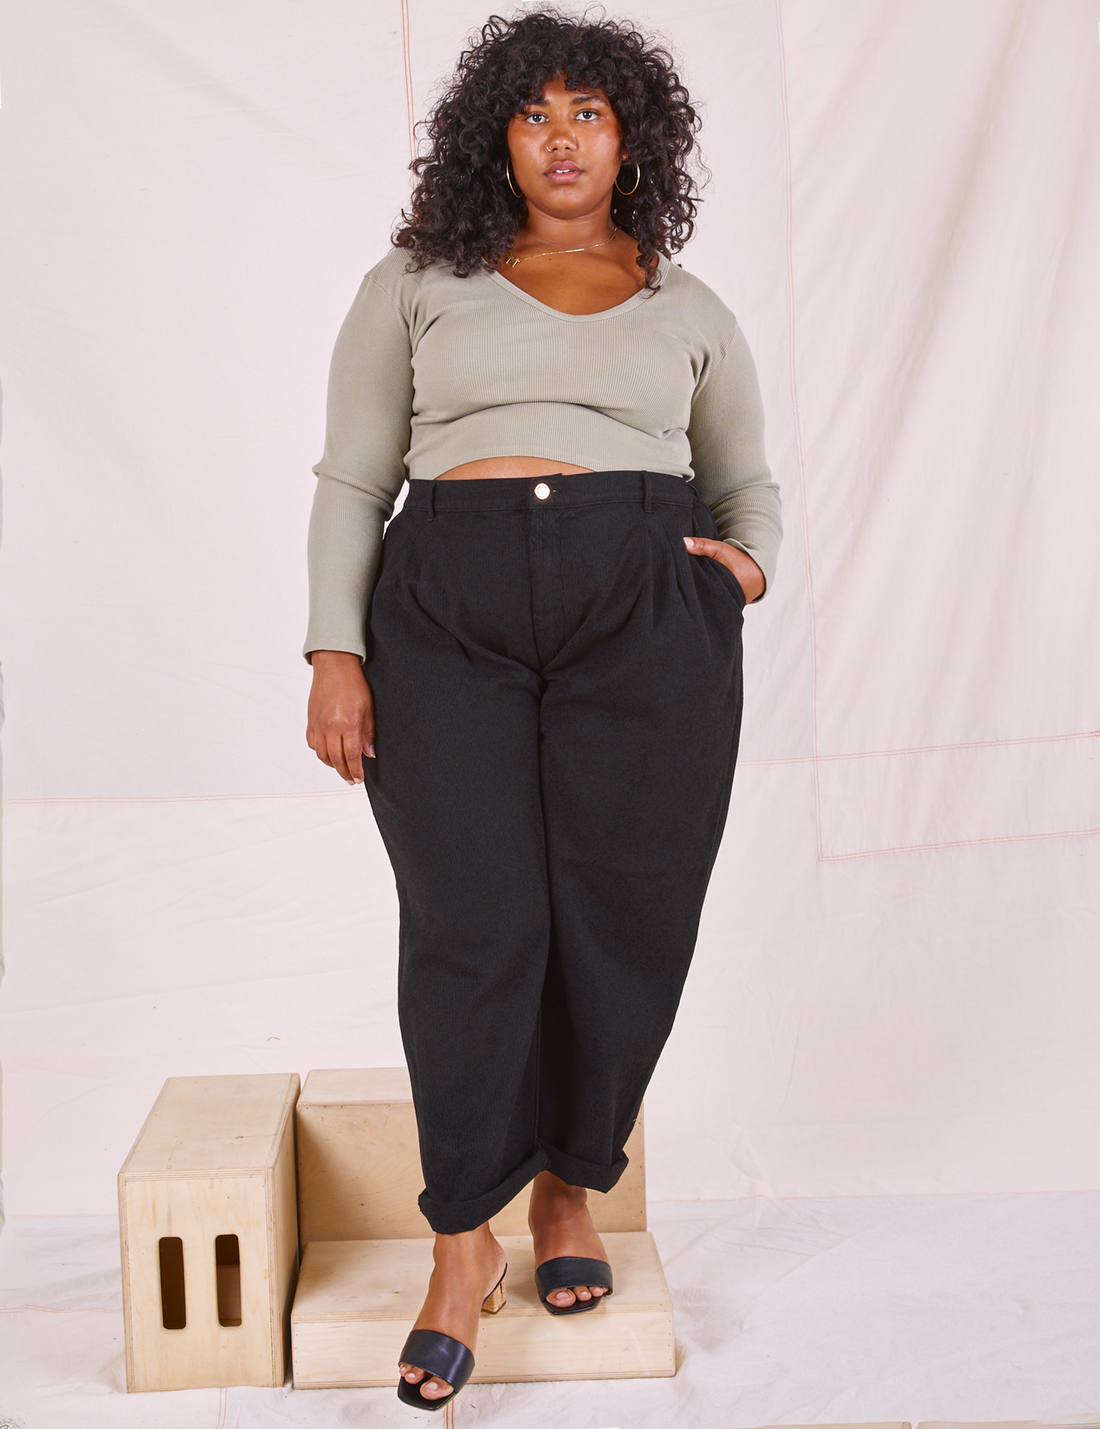 Morgan is 5'5" and wearing 1XL Heritage Trousers in Basic Black paired with khaki grey Long Sleeve V-Neck Tee